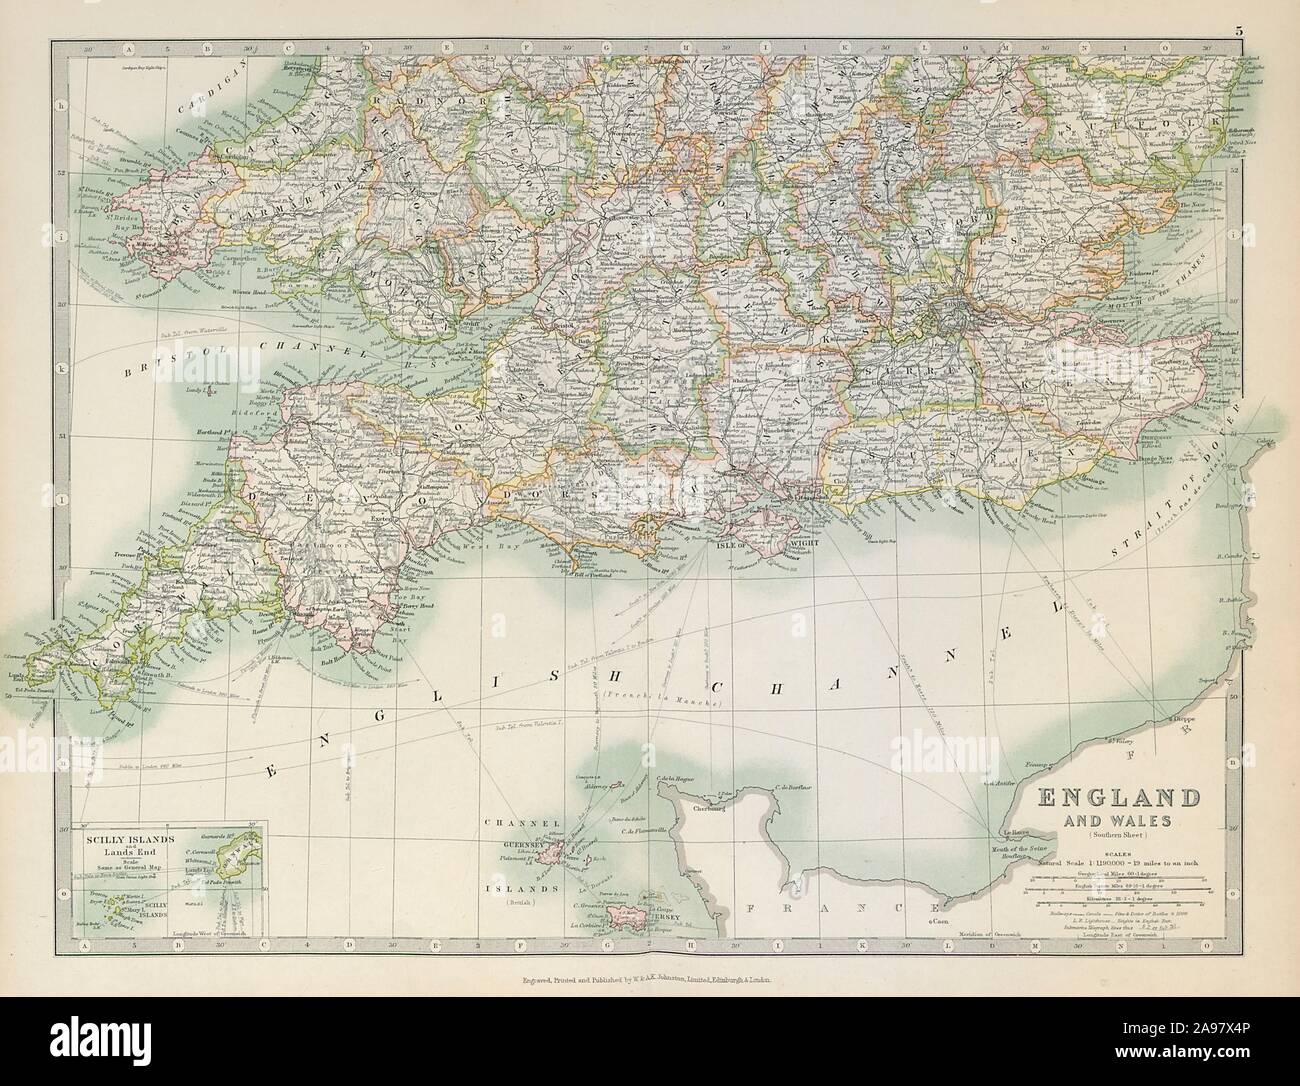 SOUTHERN ENGLAND & WALES. Shows Worcestershire enclaves. JOHNSTON 1915 old map Stock Photo